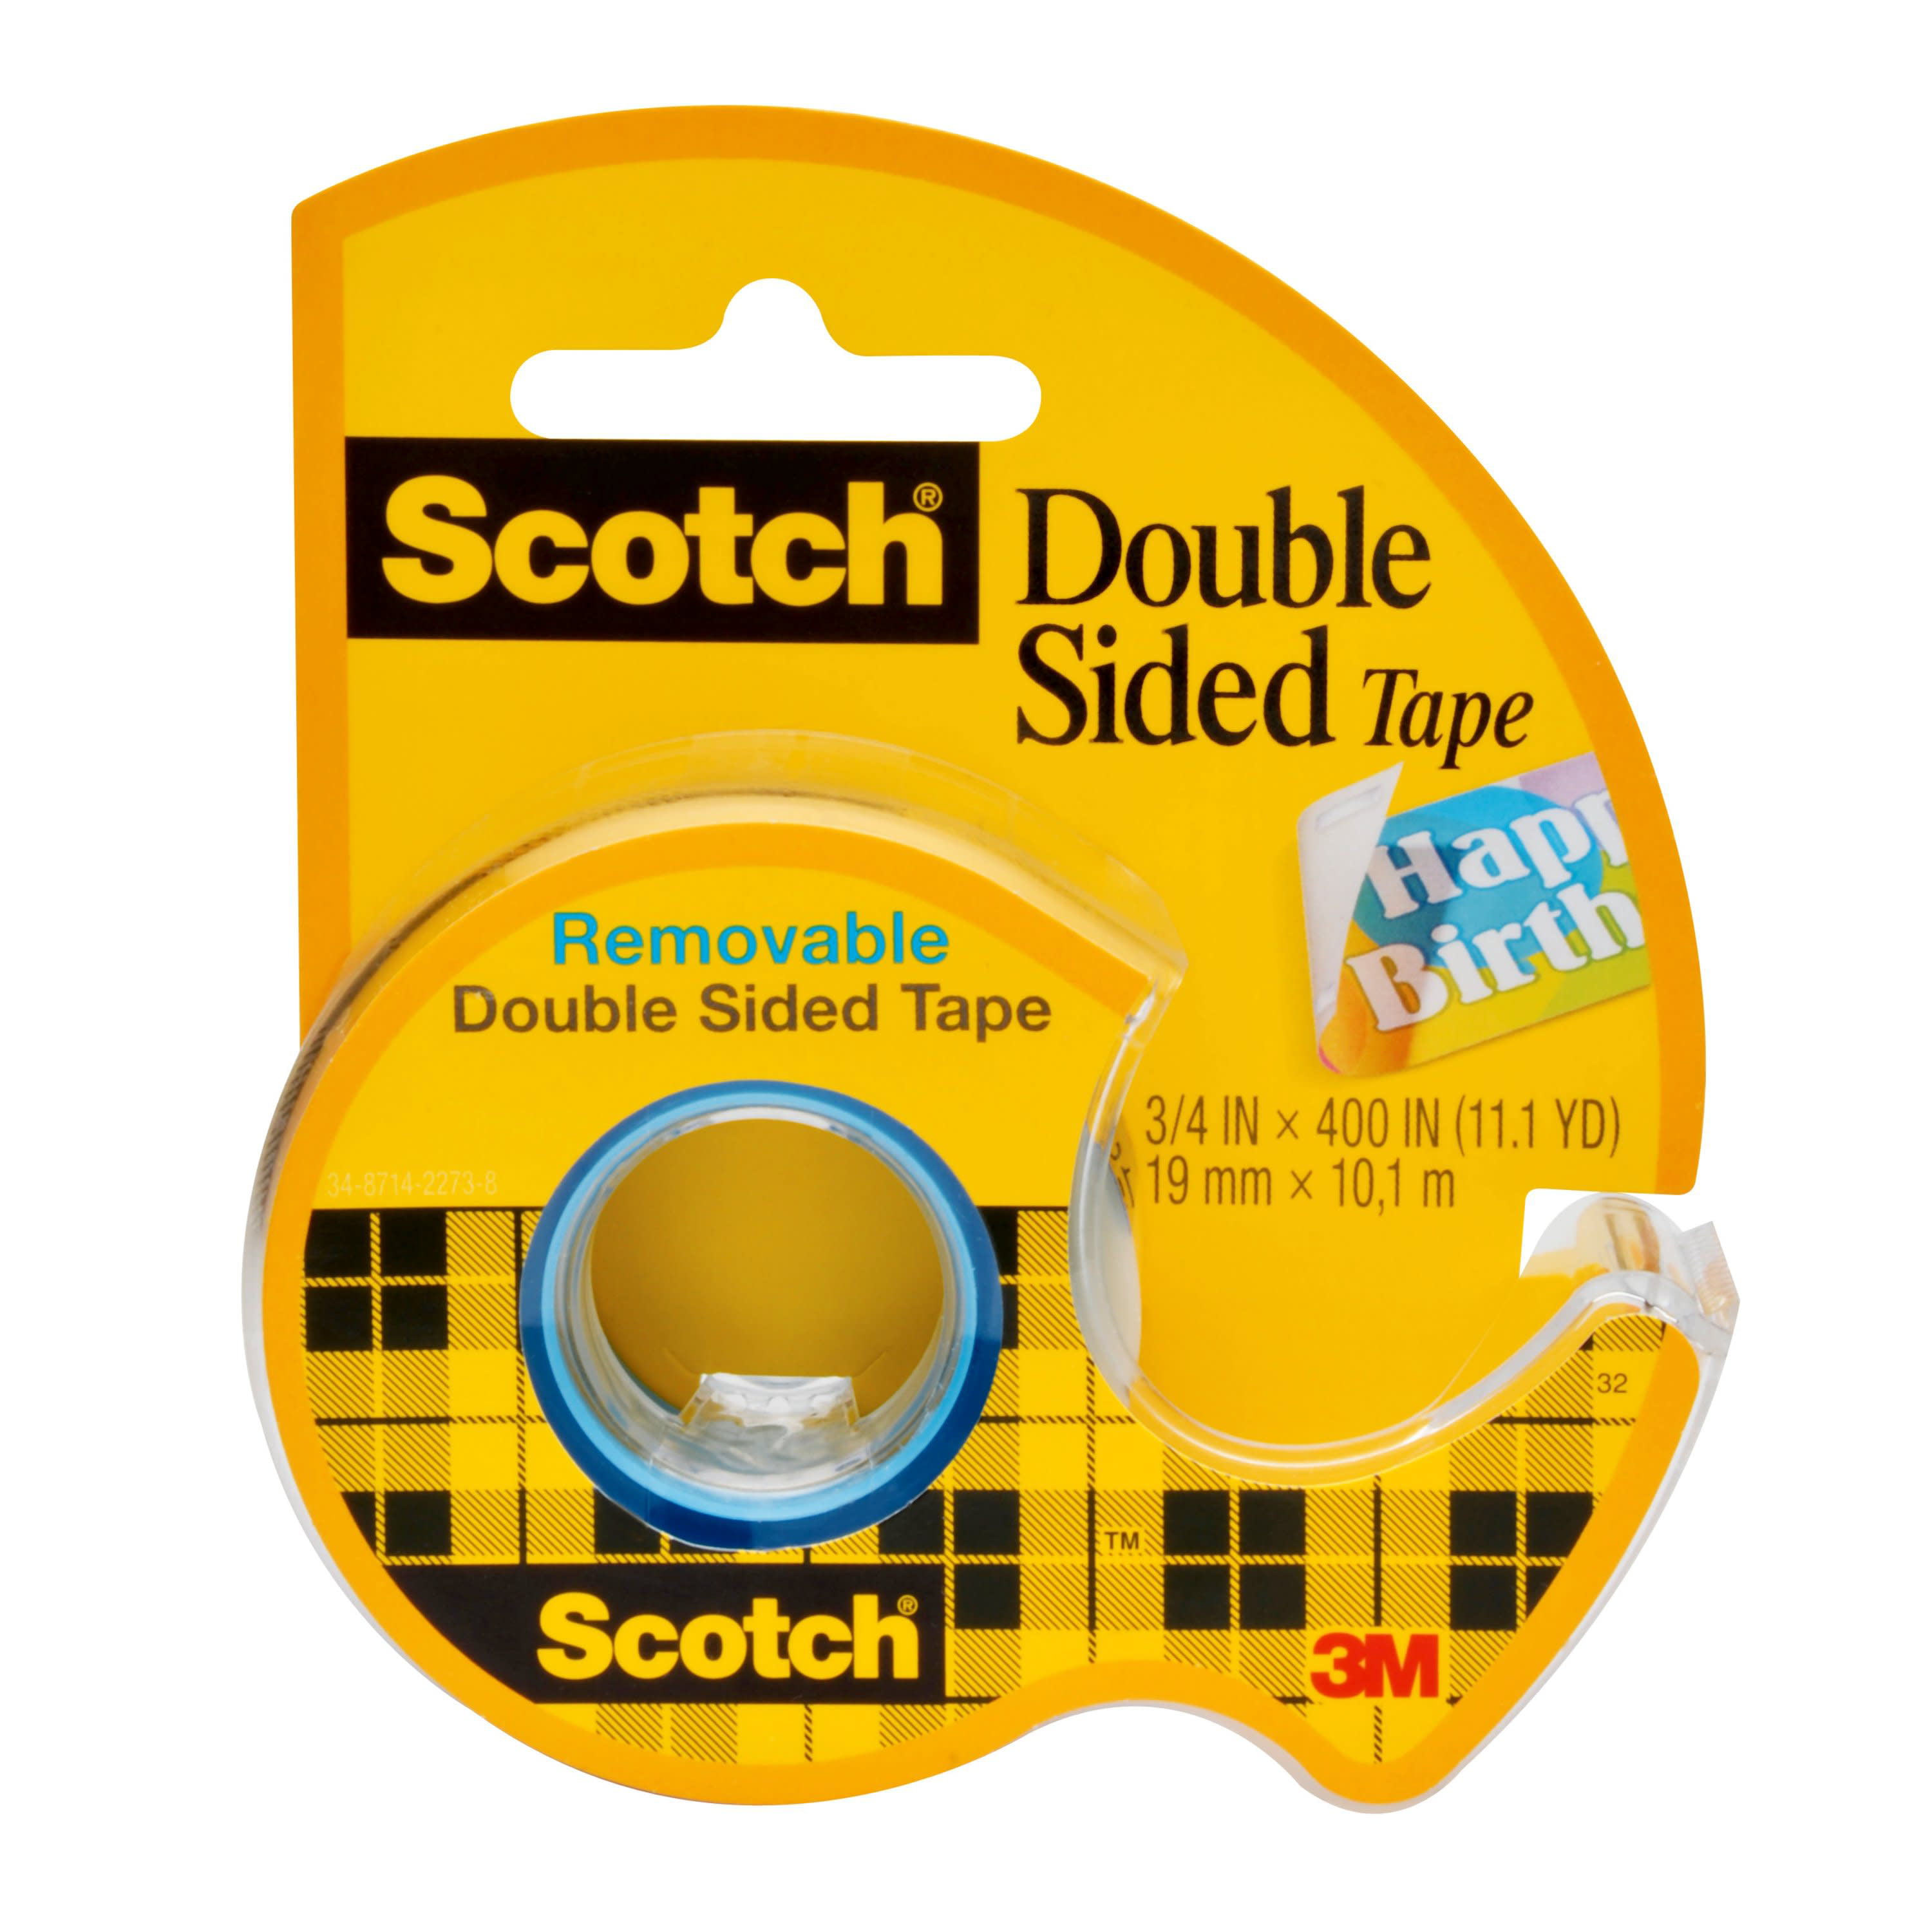 3/4 x 300 Inches Strong Engineered for Holding Boxed Photo-Safe Scotch Brand Double Sided Tape 